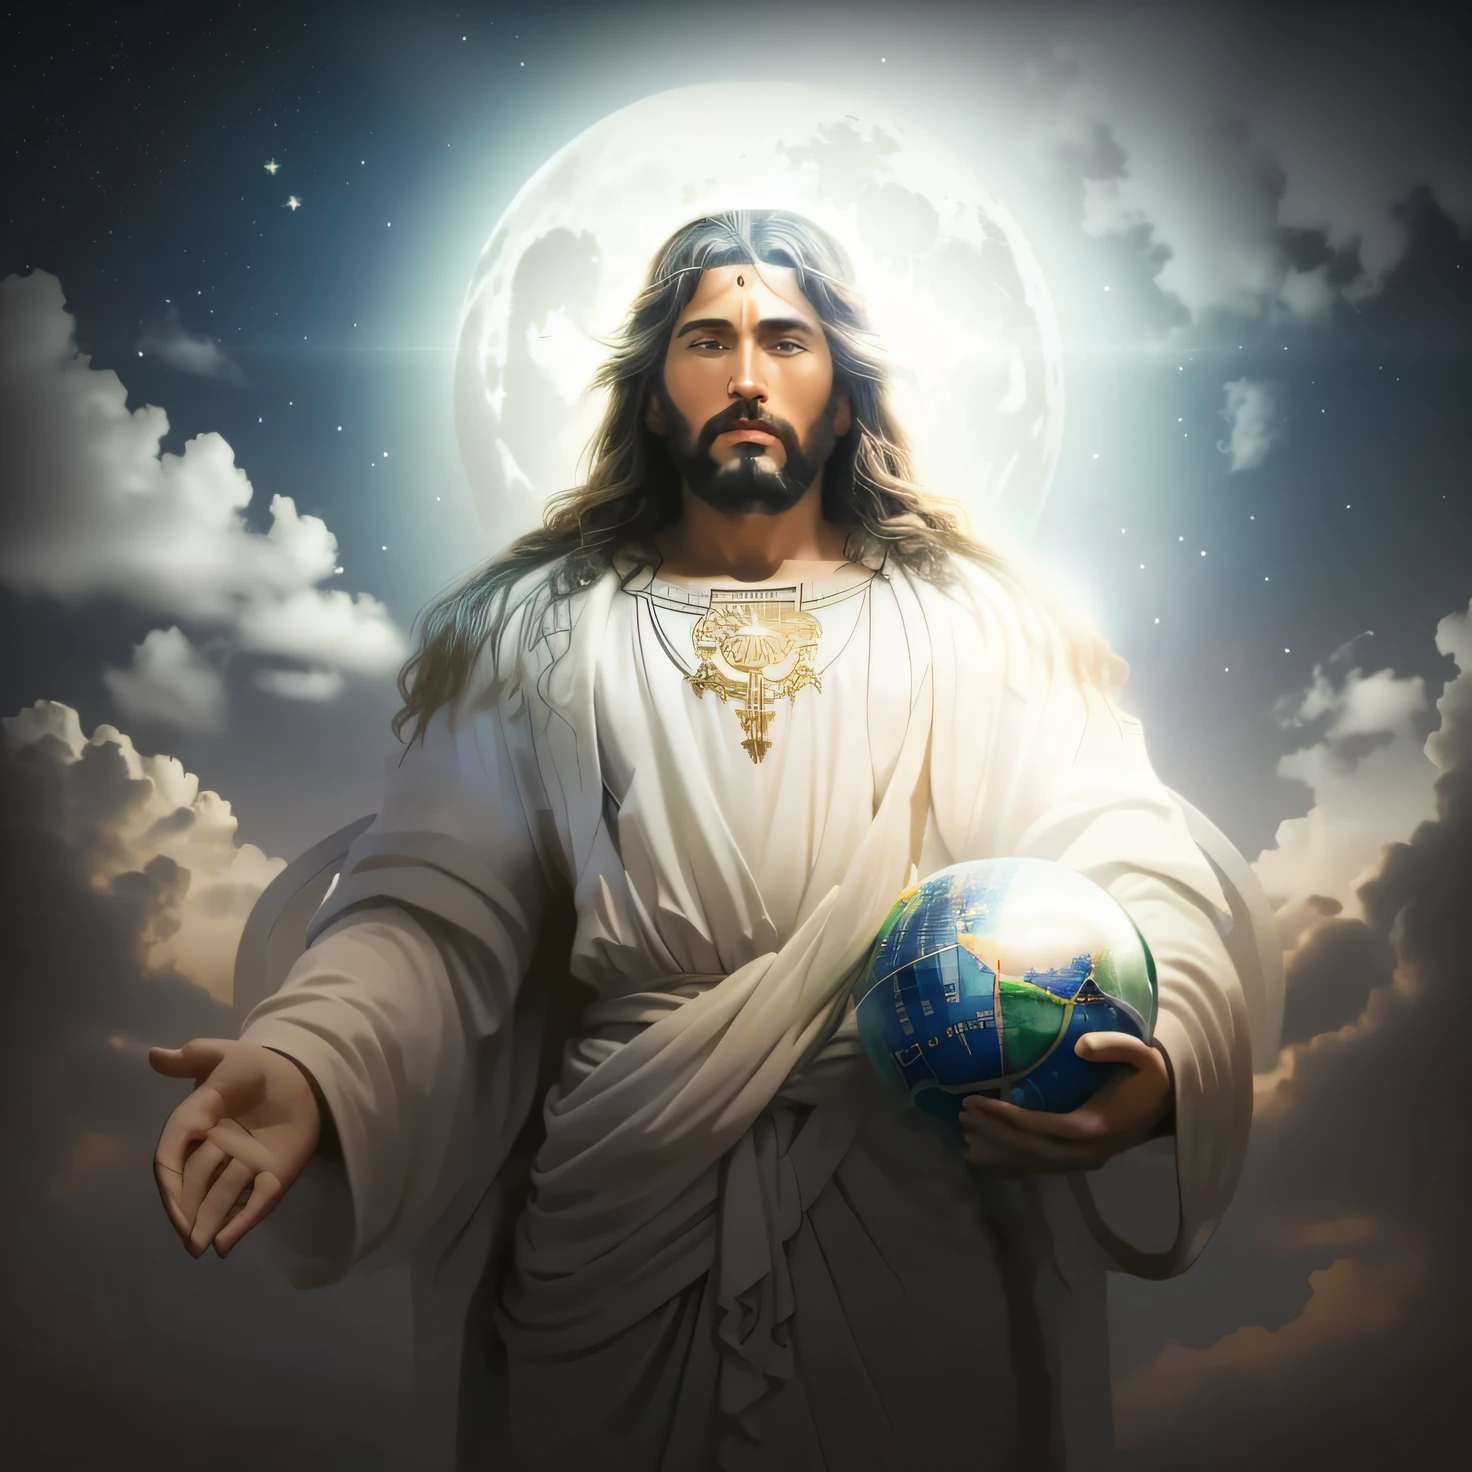 jesus holding a globe in his hands in front of a full moon, jesus christ, young almighty god, second coming, concept art of god, religious imagery, the lord and savior, jesus christ in mass effect, jesus, portrait of jesus christ, god looking at me, the god emperor of mankind, gigachad jesus, portrait of a heavenly god